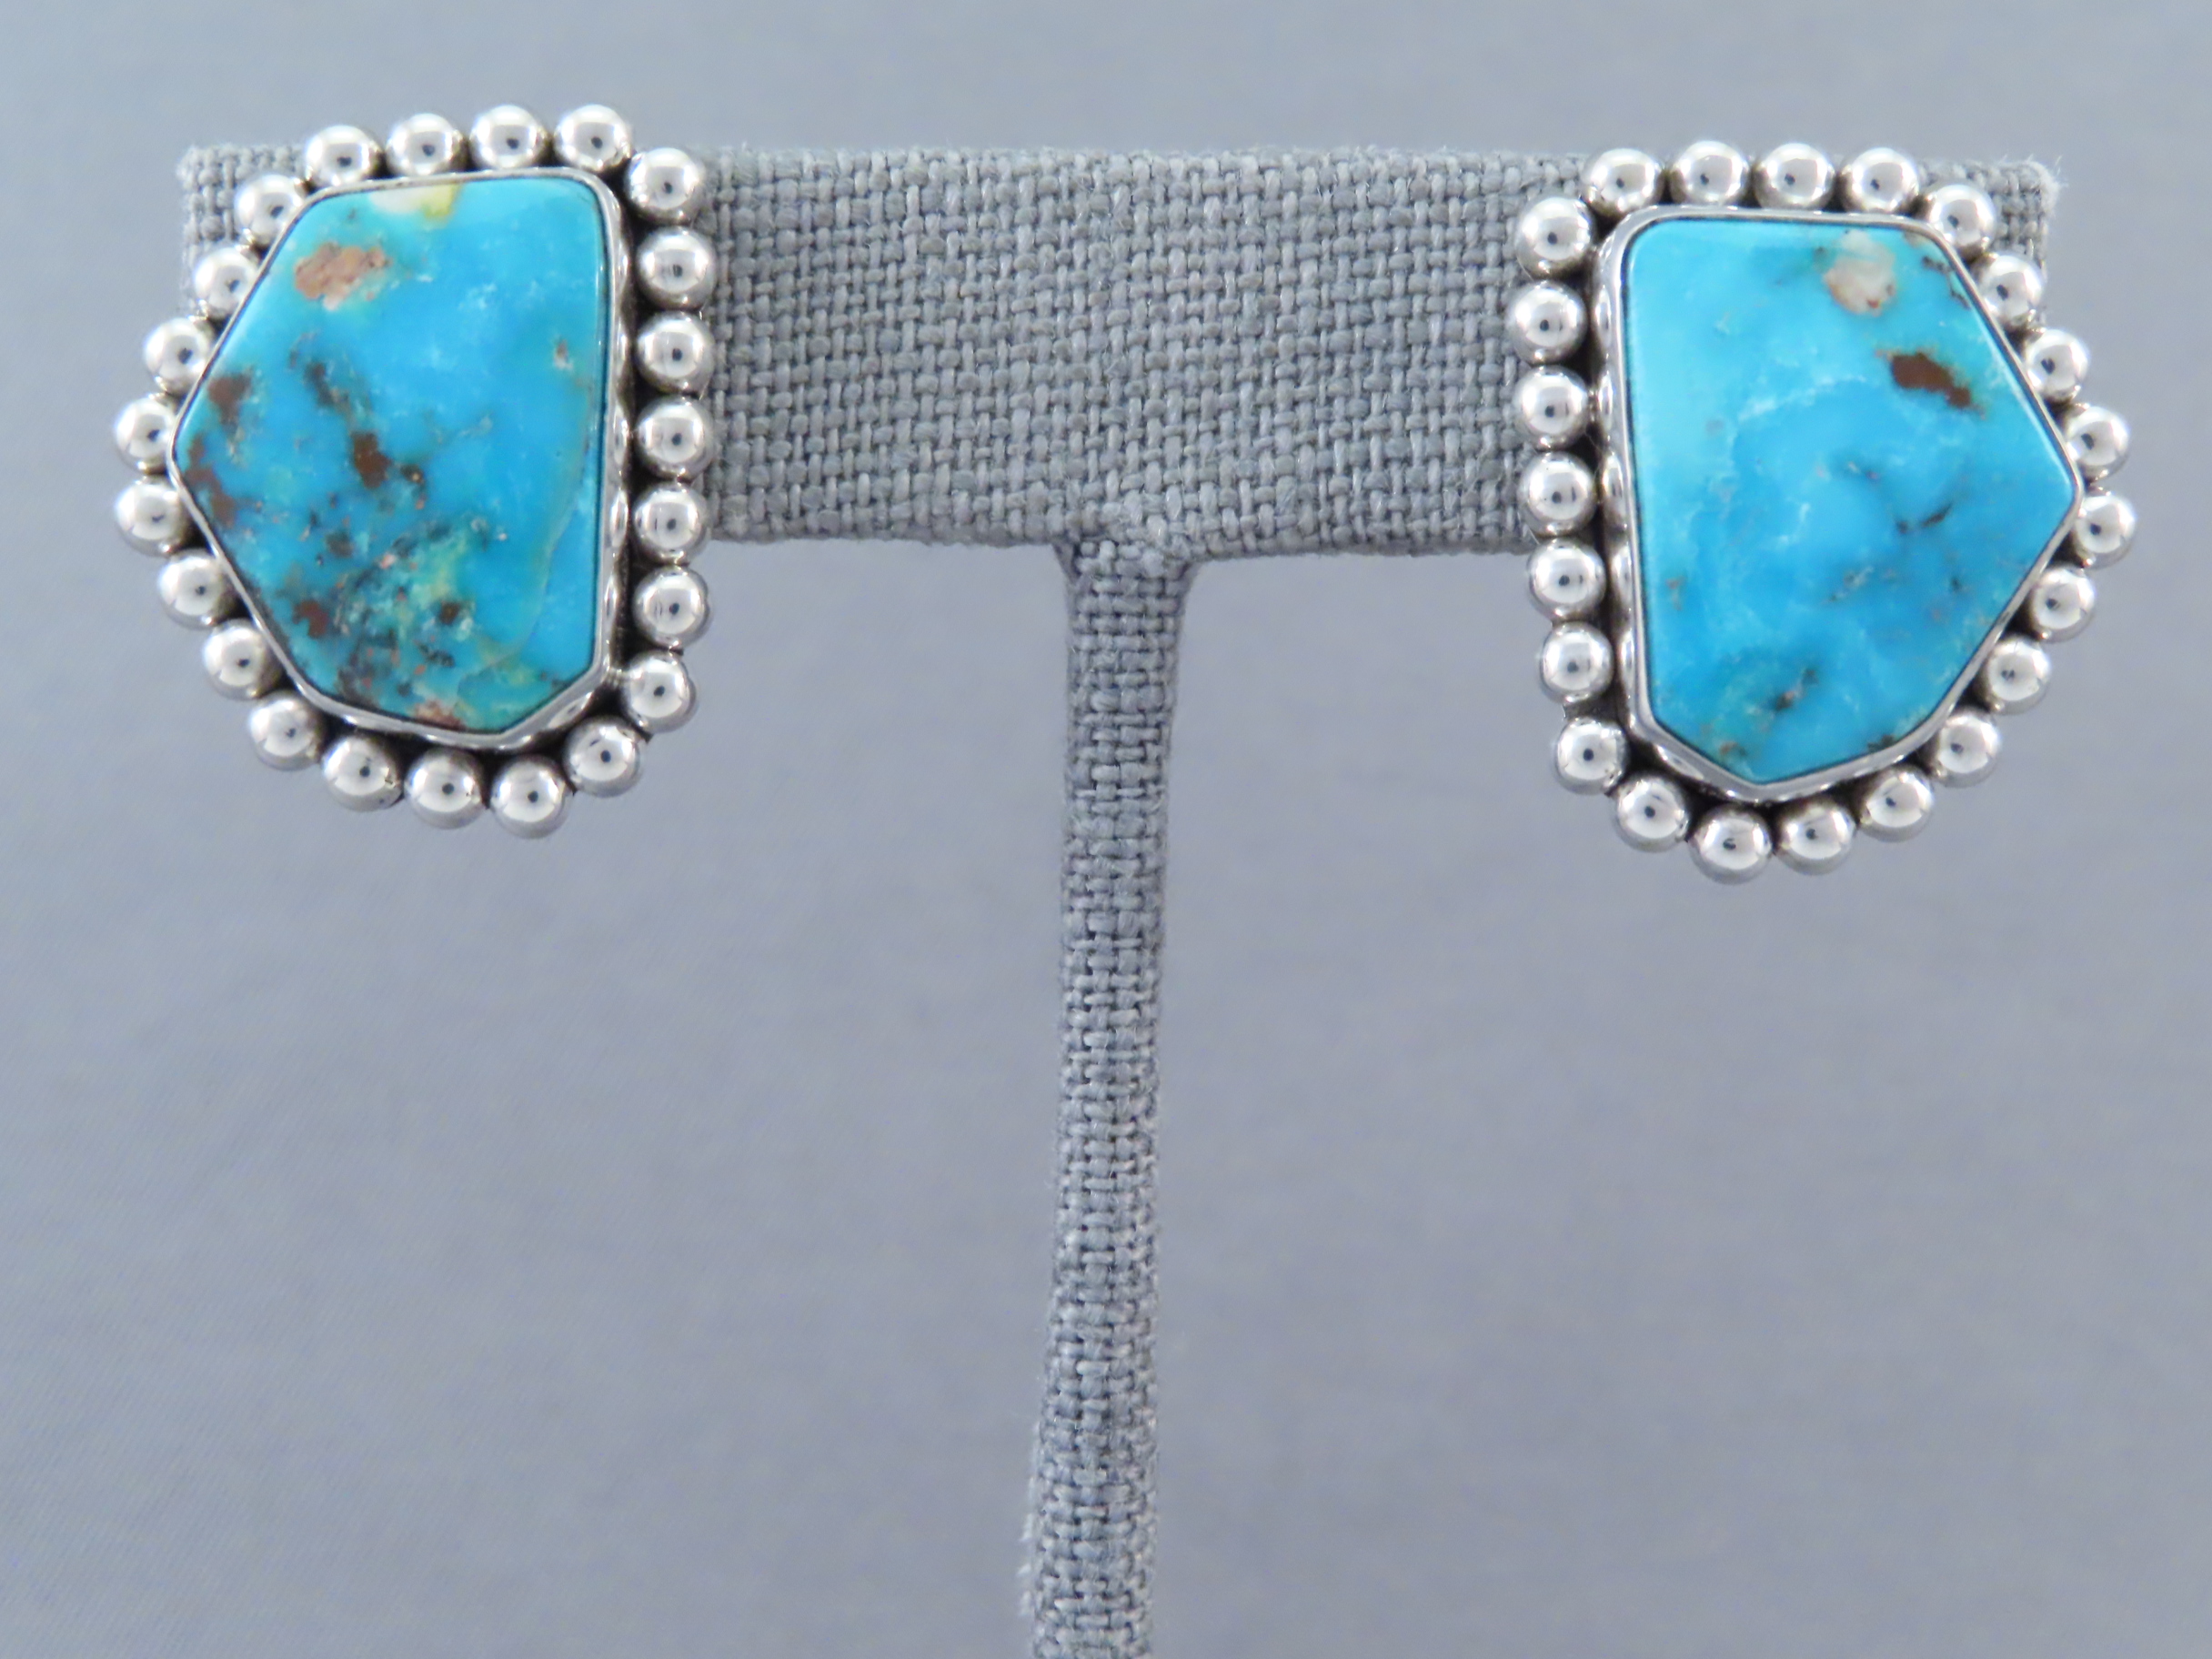 Turquoise Jewelry - Sterling Silver & Fox Turquoise Earrings (posts) by Navajo Indian jeweler, Artie Yellowhorse $495- FOR SALE